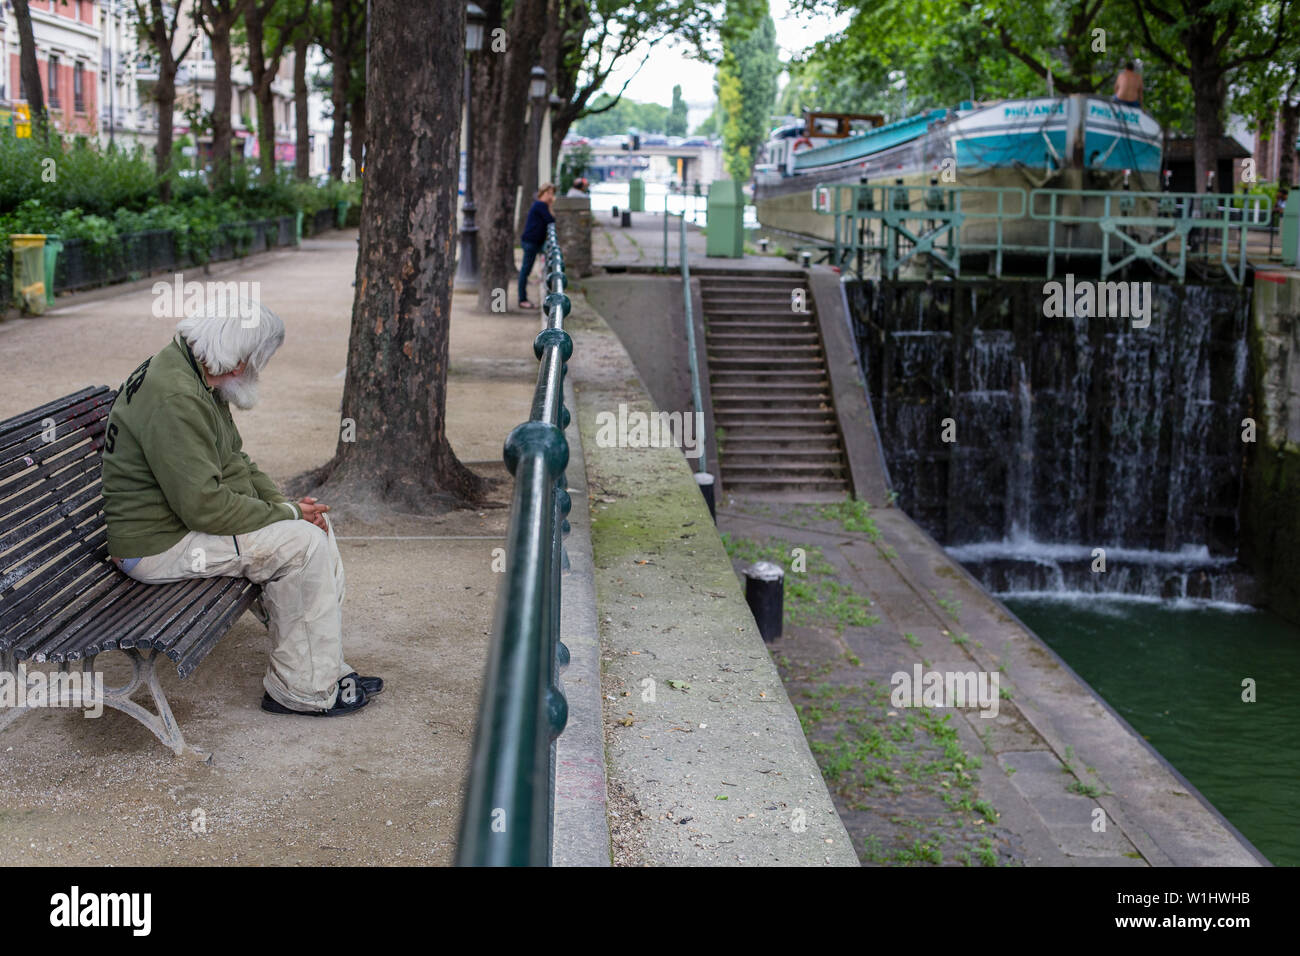 Paris, France - August 4, 2014: a commercial boat navigating the Canal Saint Martin at Paris, France Stock Photo